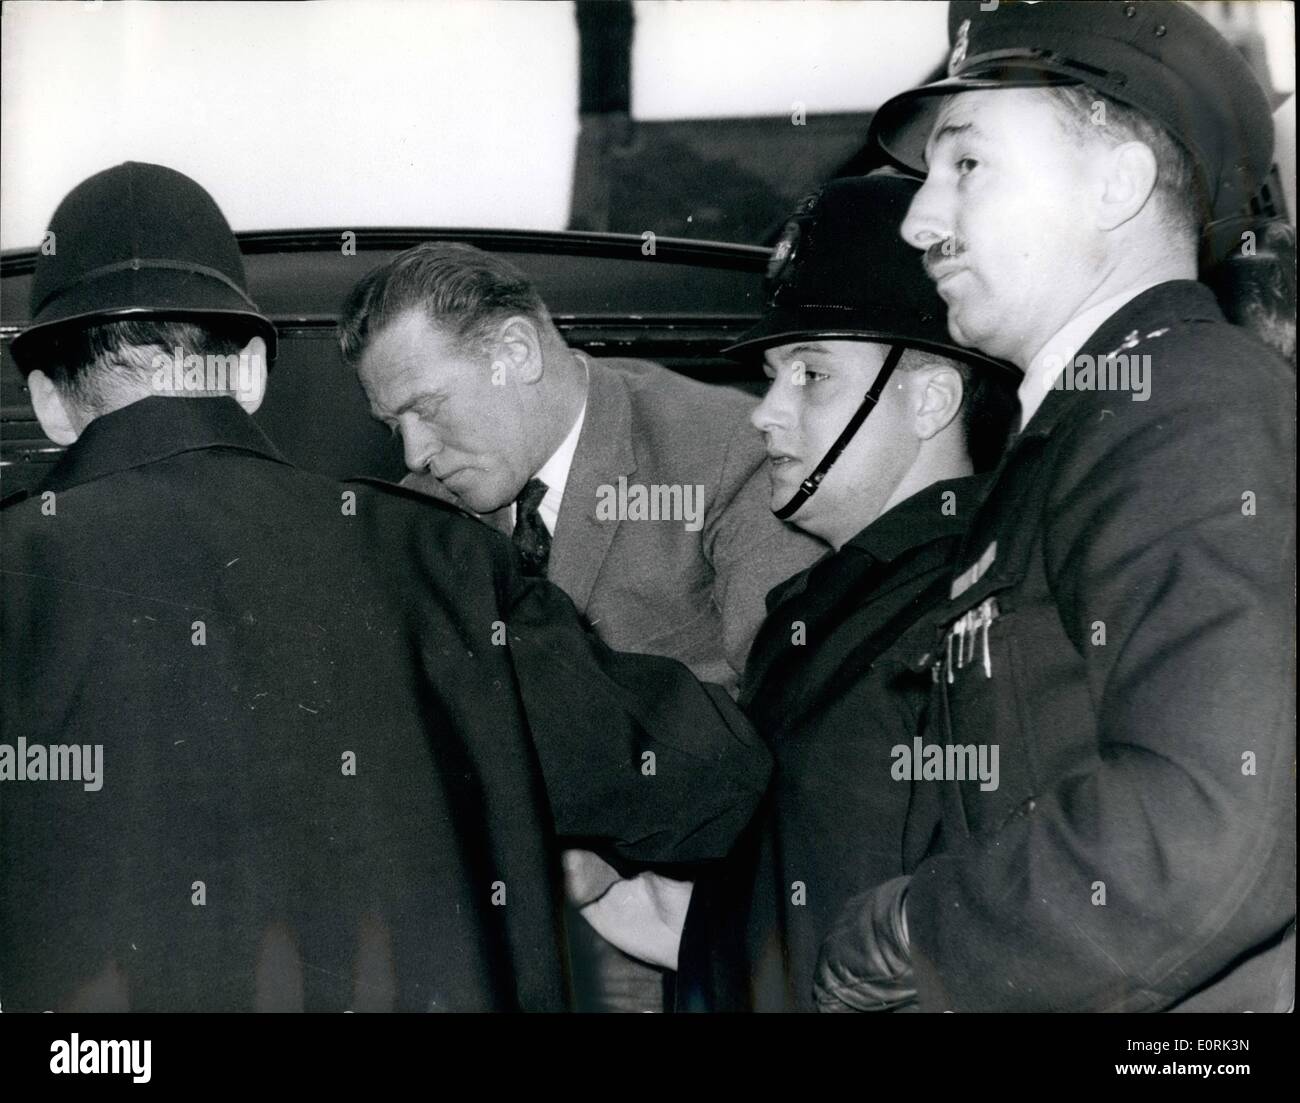 Dec. 12, 1959 - A Police Constable And Three Men Accused Of An 8,000 Bank Raid: 39-year-old Metropolitan Police Constable George Alberta Askew was charged with three other men at Waltham Cross Essex, yesterday of breaking into Chingford's National Provincial Bank and Stealing cash and Jewellery worth 8,103. The men and two women - a mother and daughter - were also accused of receiving part of the stolen money. All the accused were remanded for a week, the men in custody and the women on ball Stock Photo